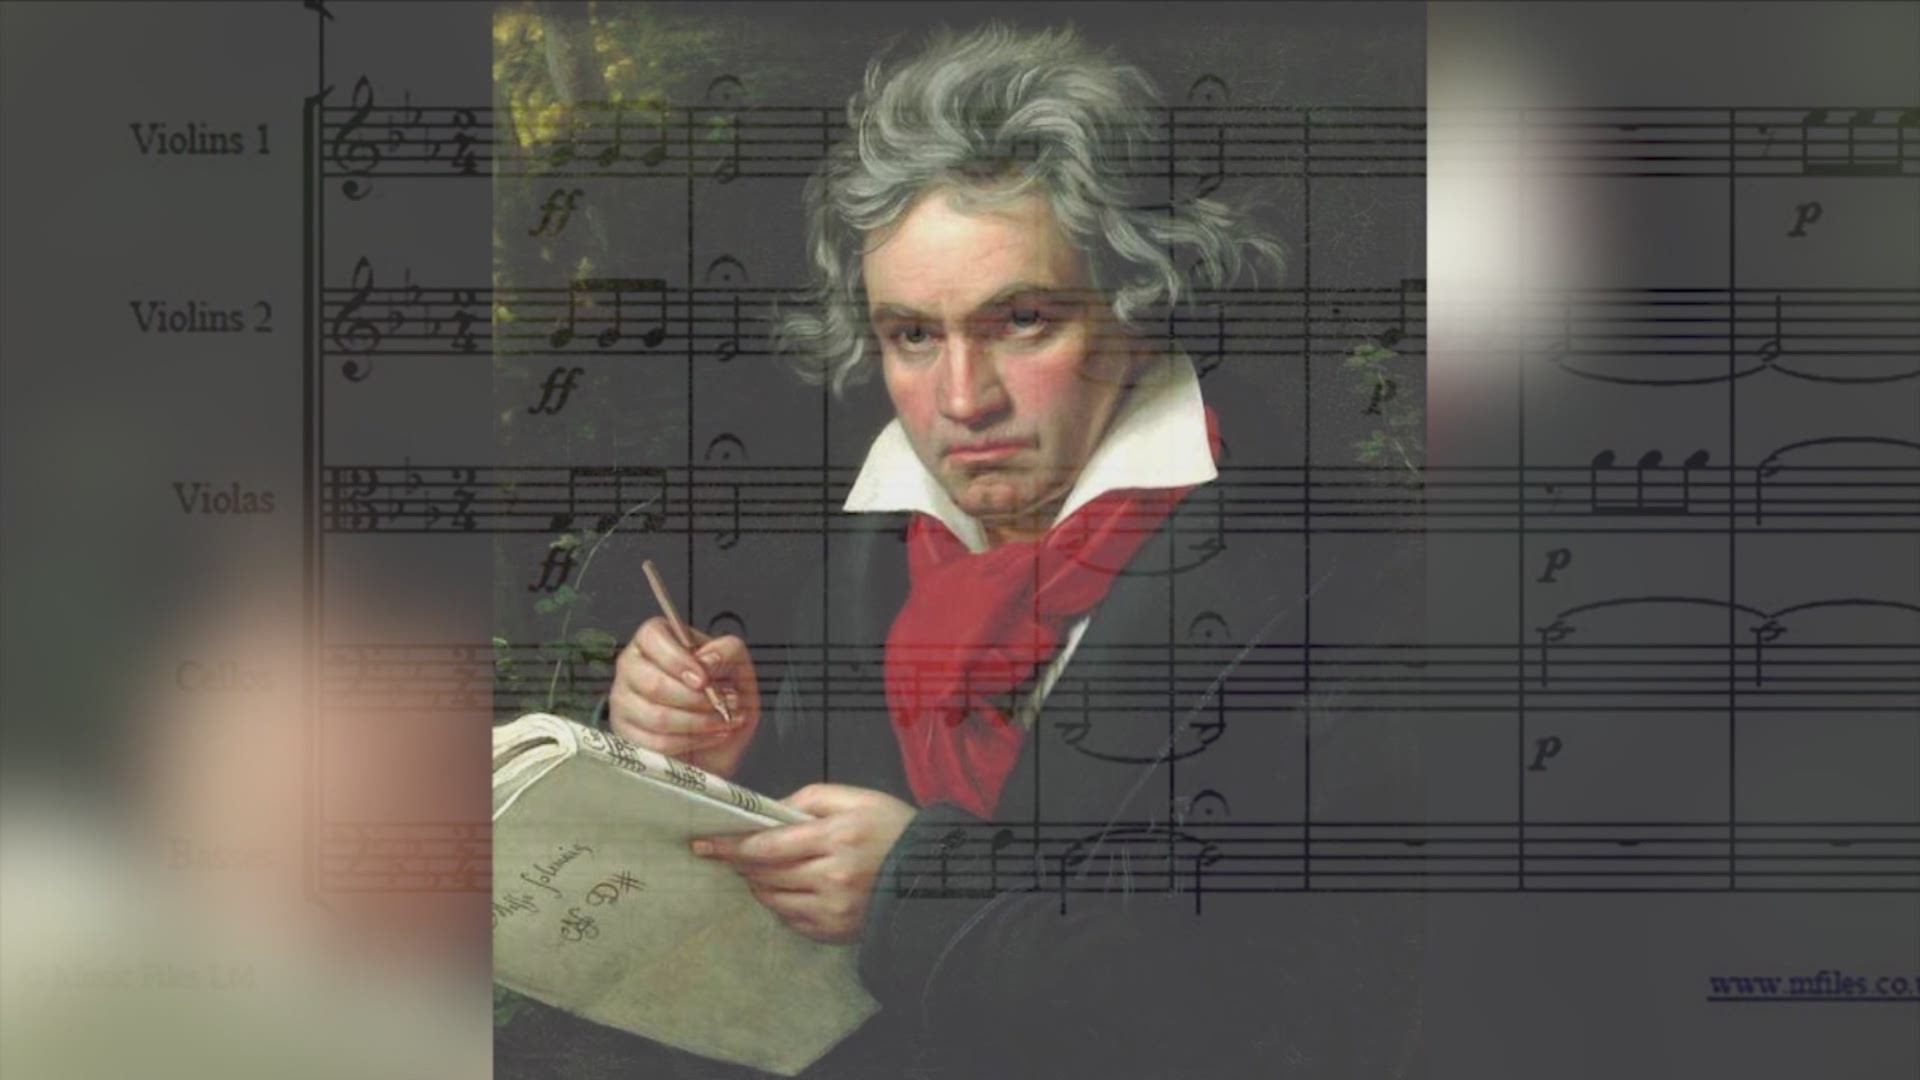 Mice are proving that Beethoven's hearing loss can be treated